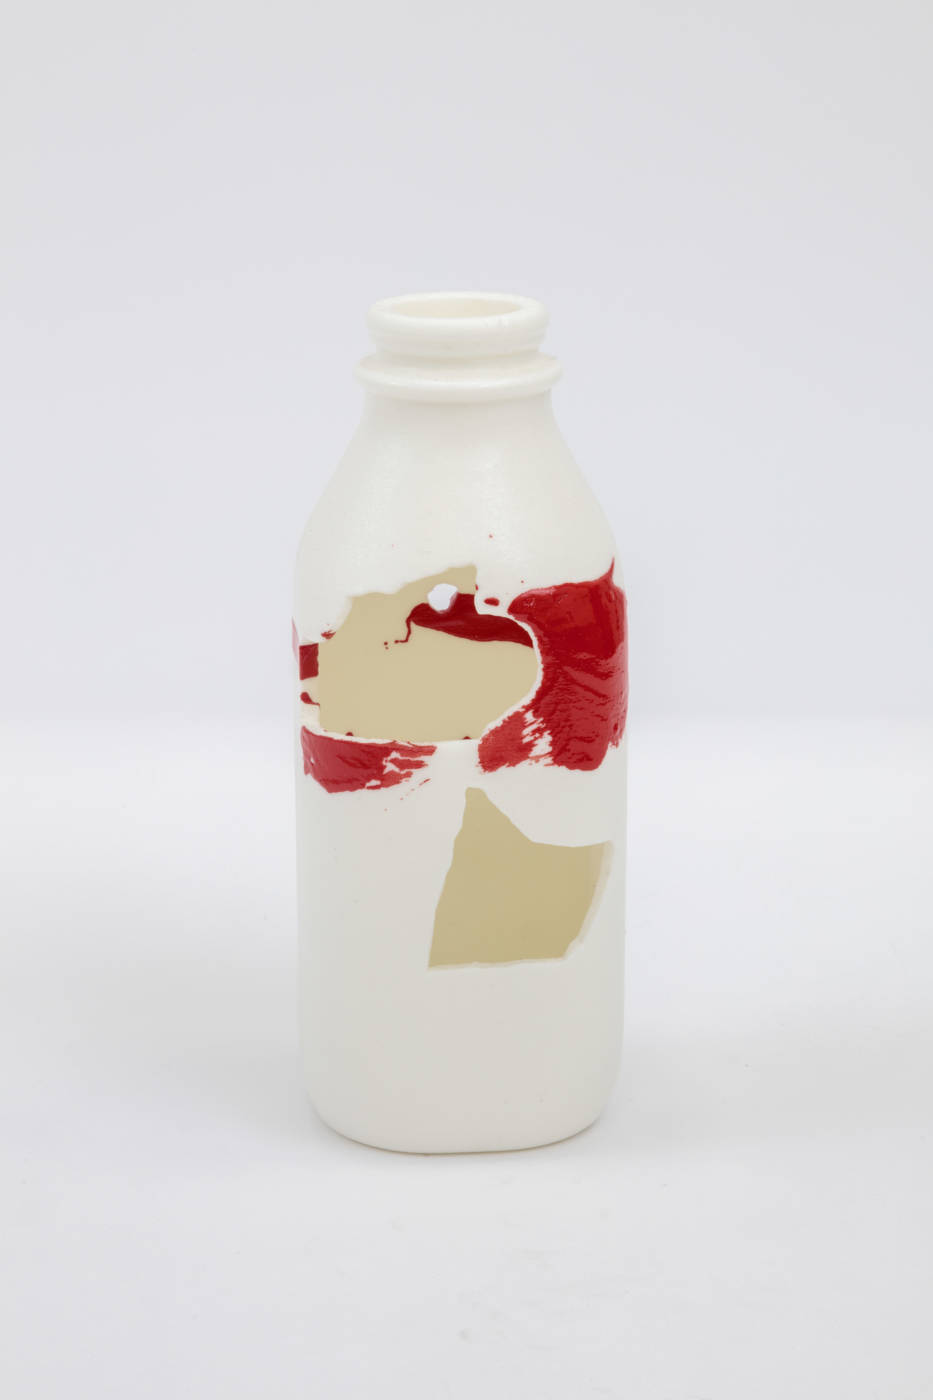 Bottle sculpture with splashes of cream and red color